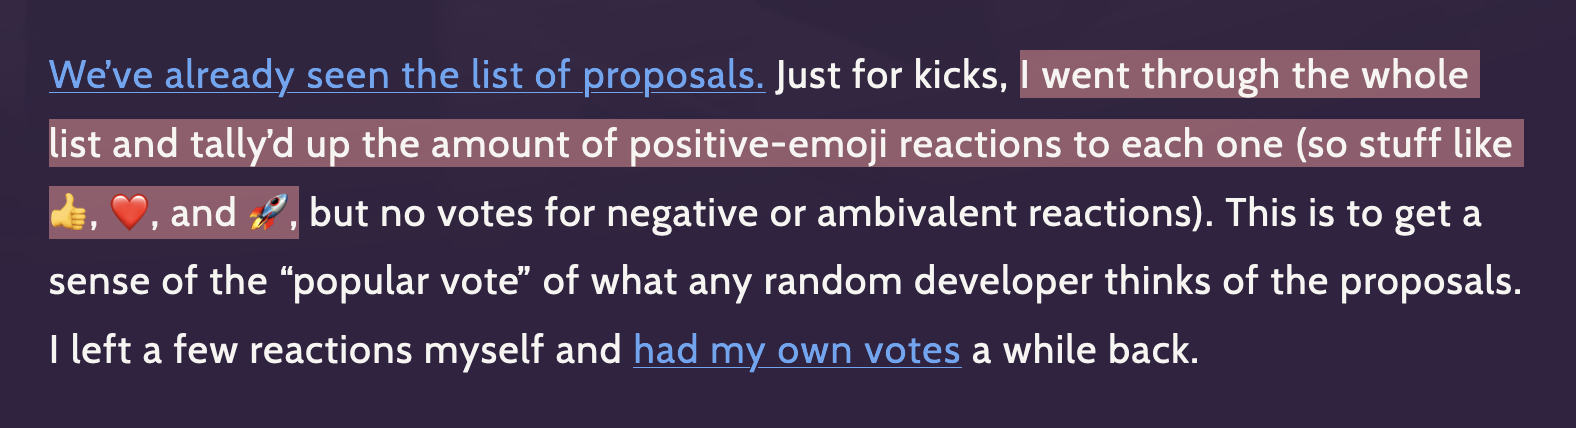 We’ve already seen the list of proposals. Just for kicks, I went through the whole list and tally’d up the amount of positive-emoji reactions to each one (so stuff like 👍, ❤️, and 🚀, but no votes for negative or ambivalent reactions). This is to get a sense of the “popular vote” of what any random developer thinks of the proposals. I left a few reactions myself and had my own votes a while back. 